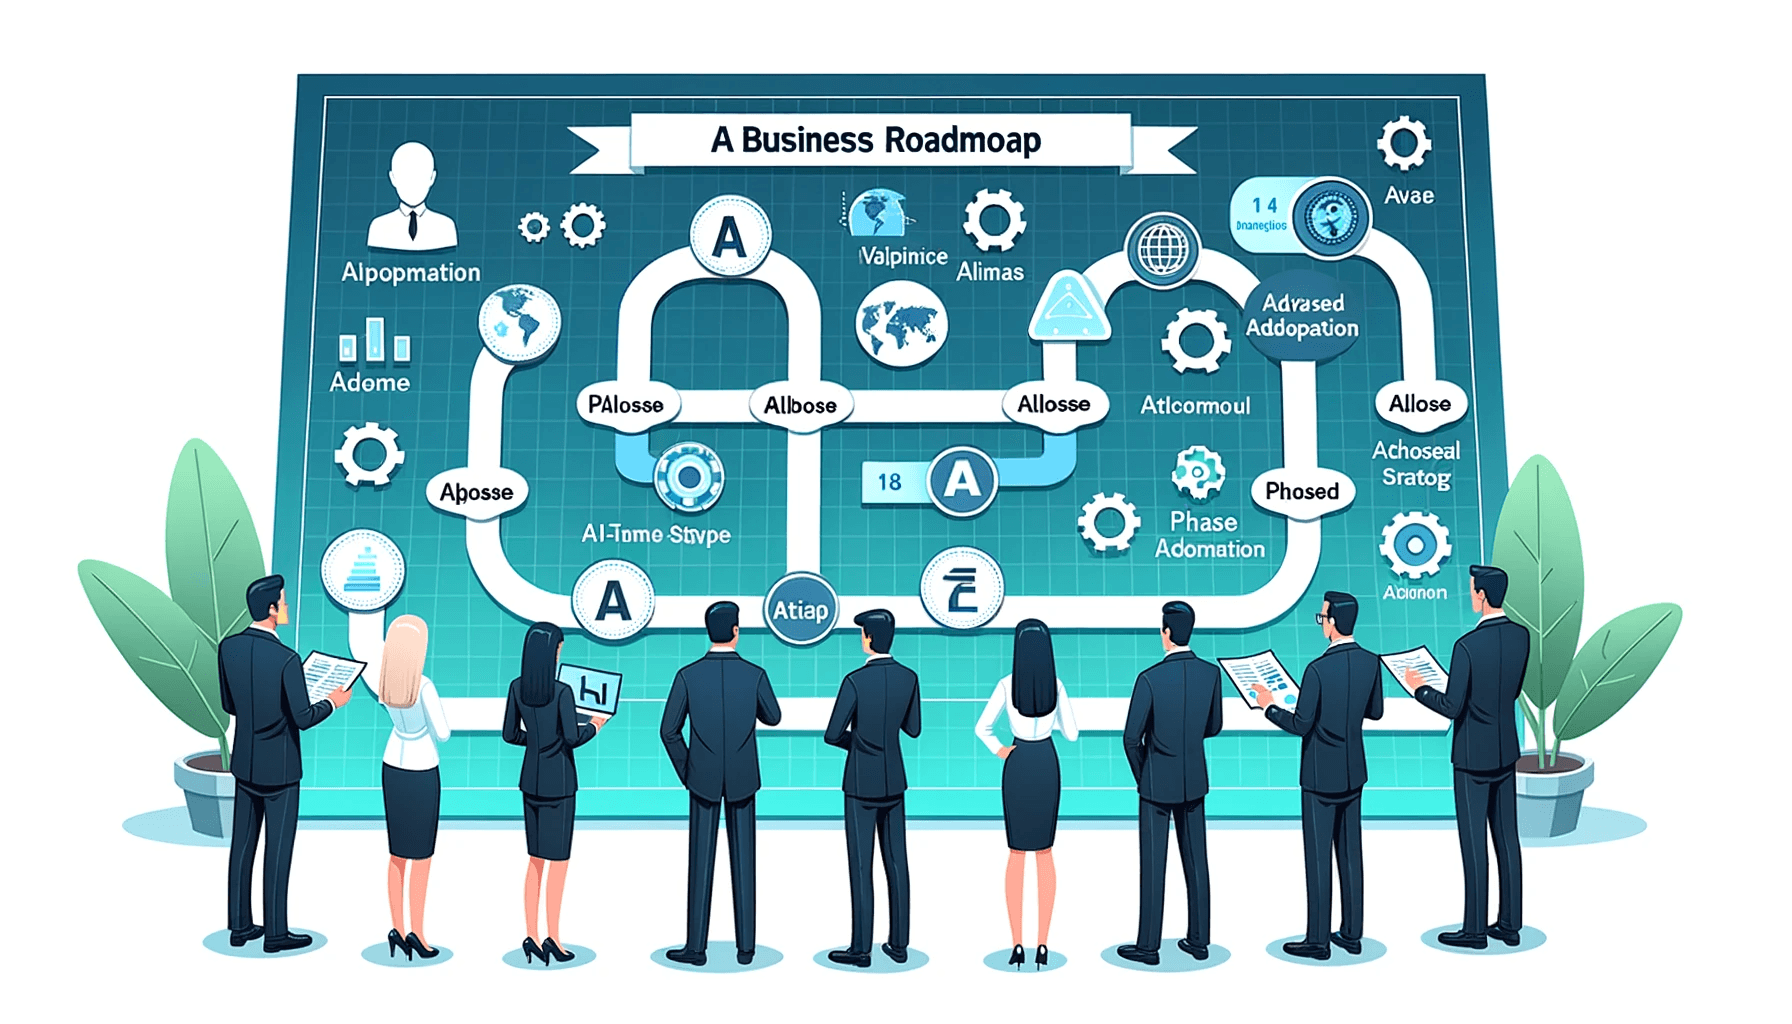 Illustration of a business roadmap with AI-themed milestones. Corporate executives, men and women of various descent, stand examining the roadmap, indicating a phased adoption strategy.